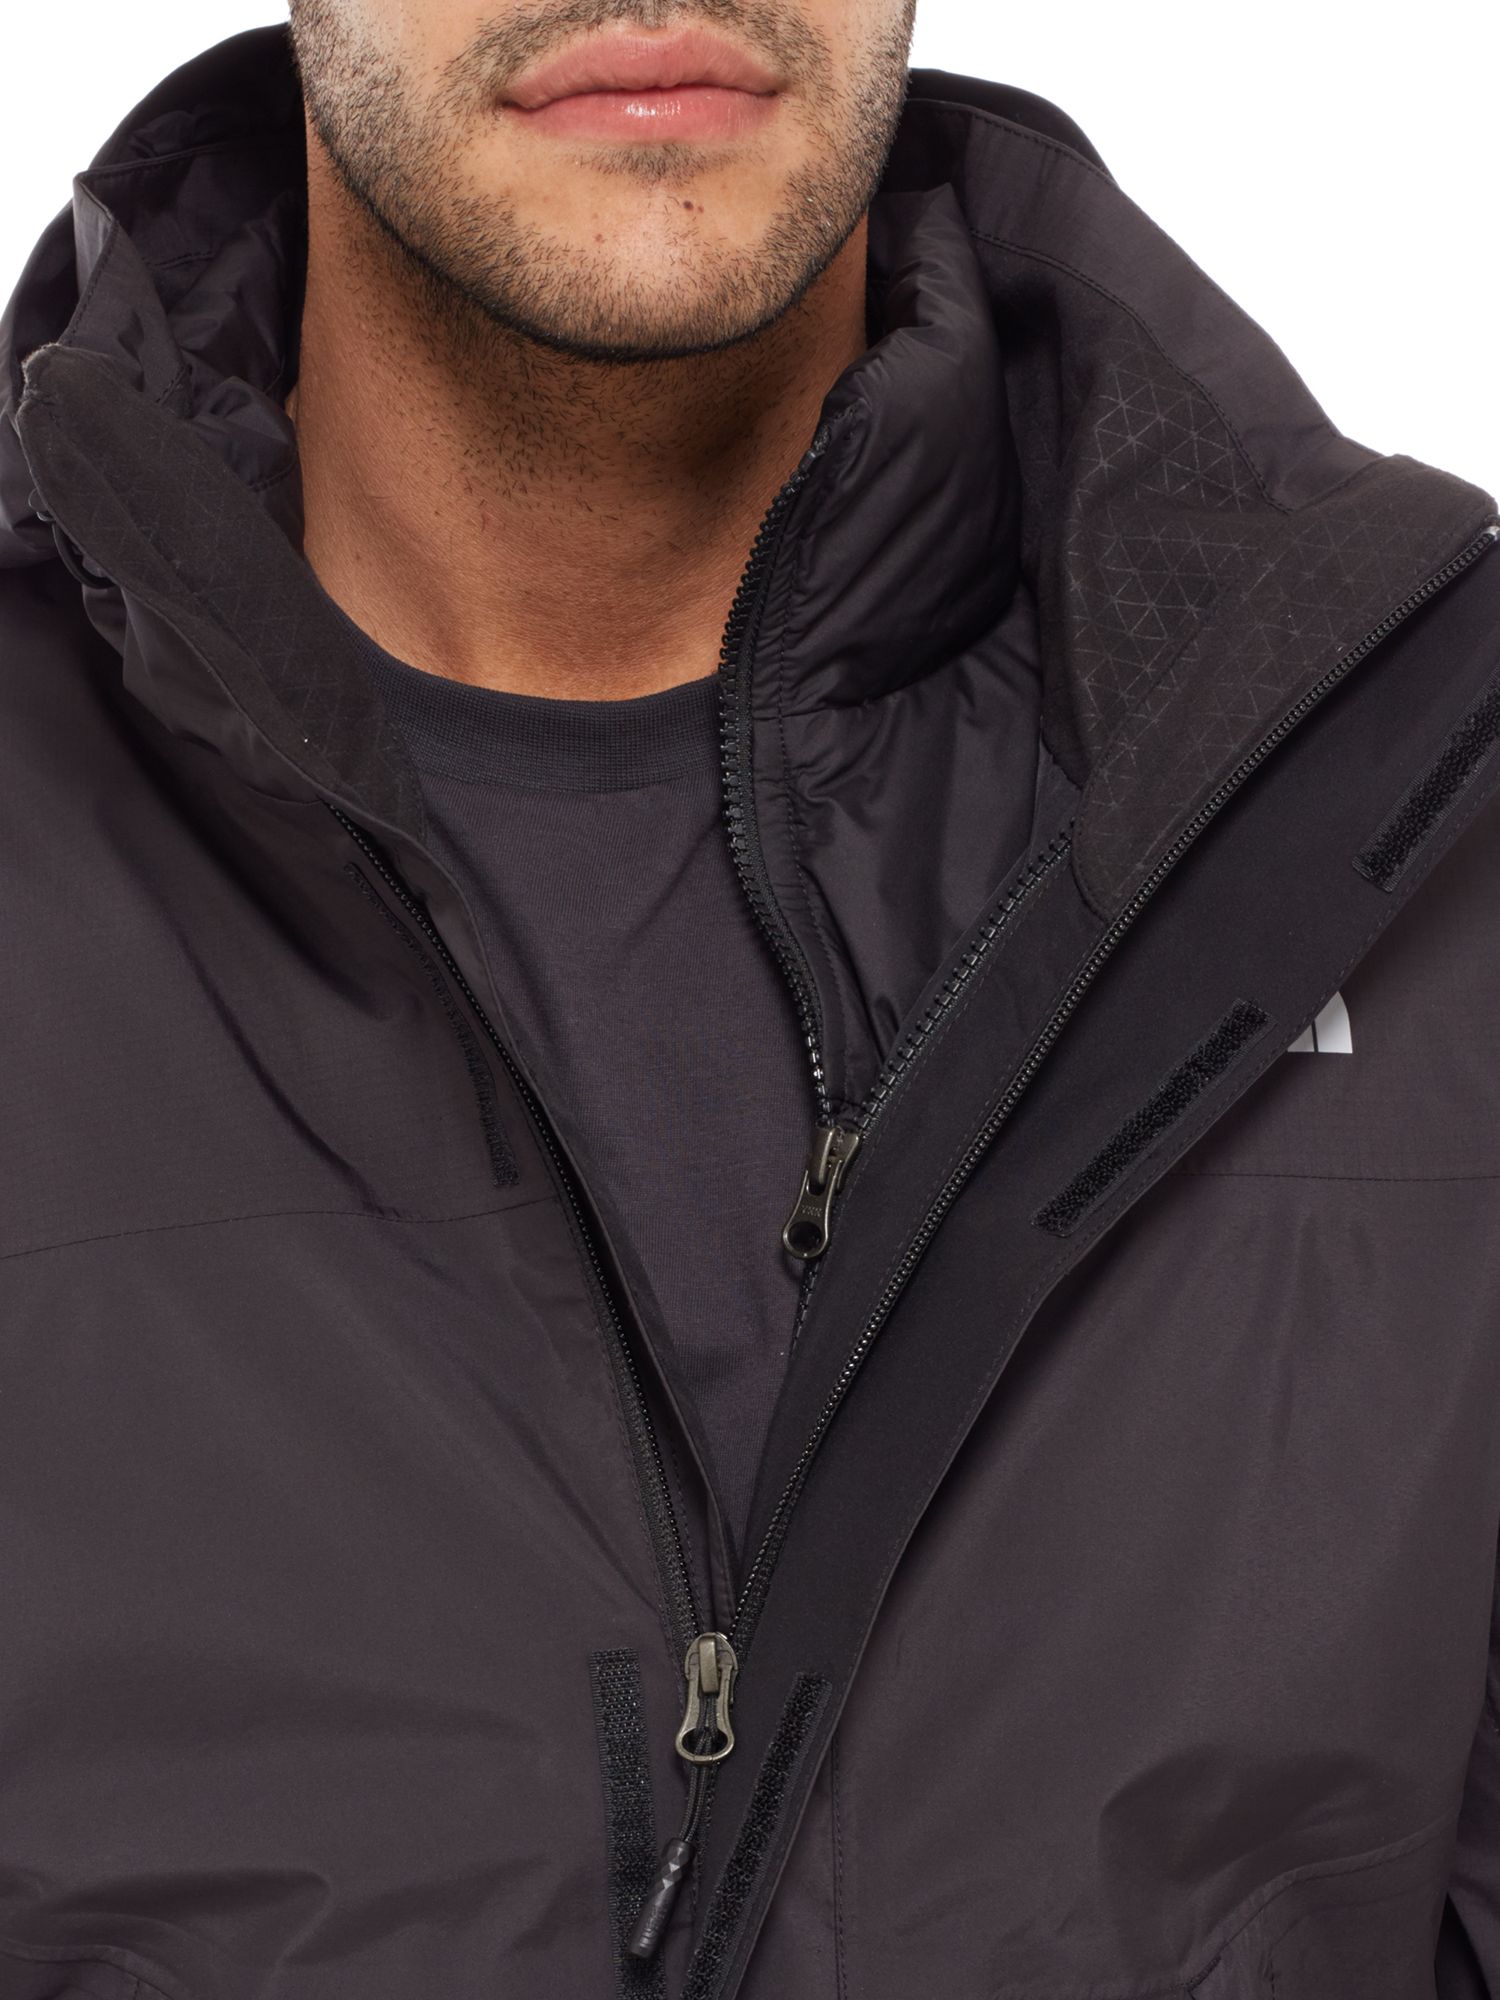 the north face men's mountain light triclimate jacket tnf black